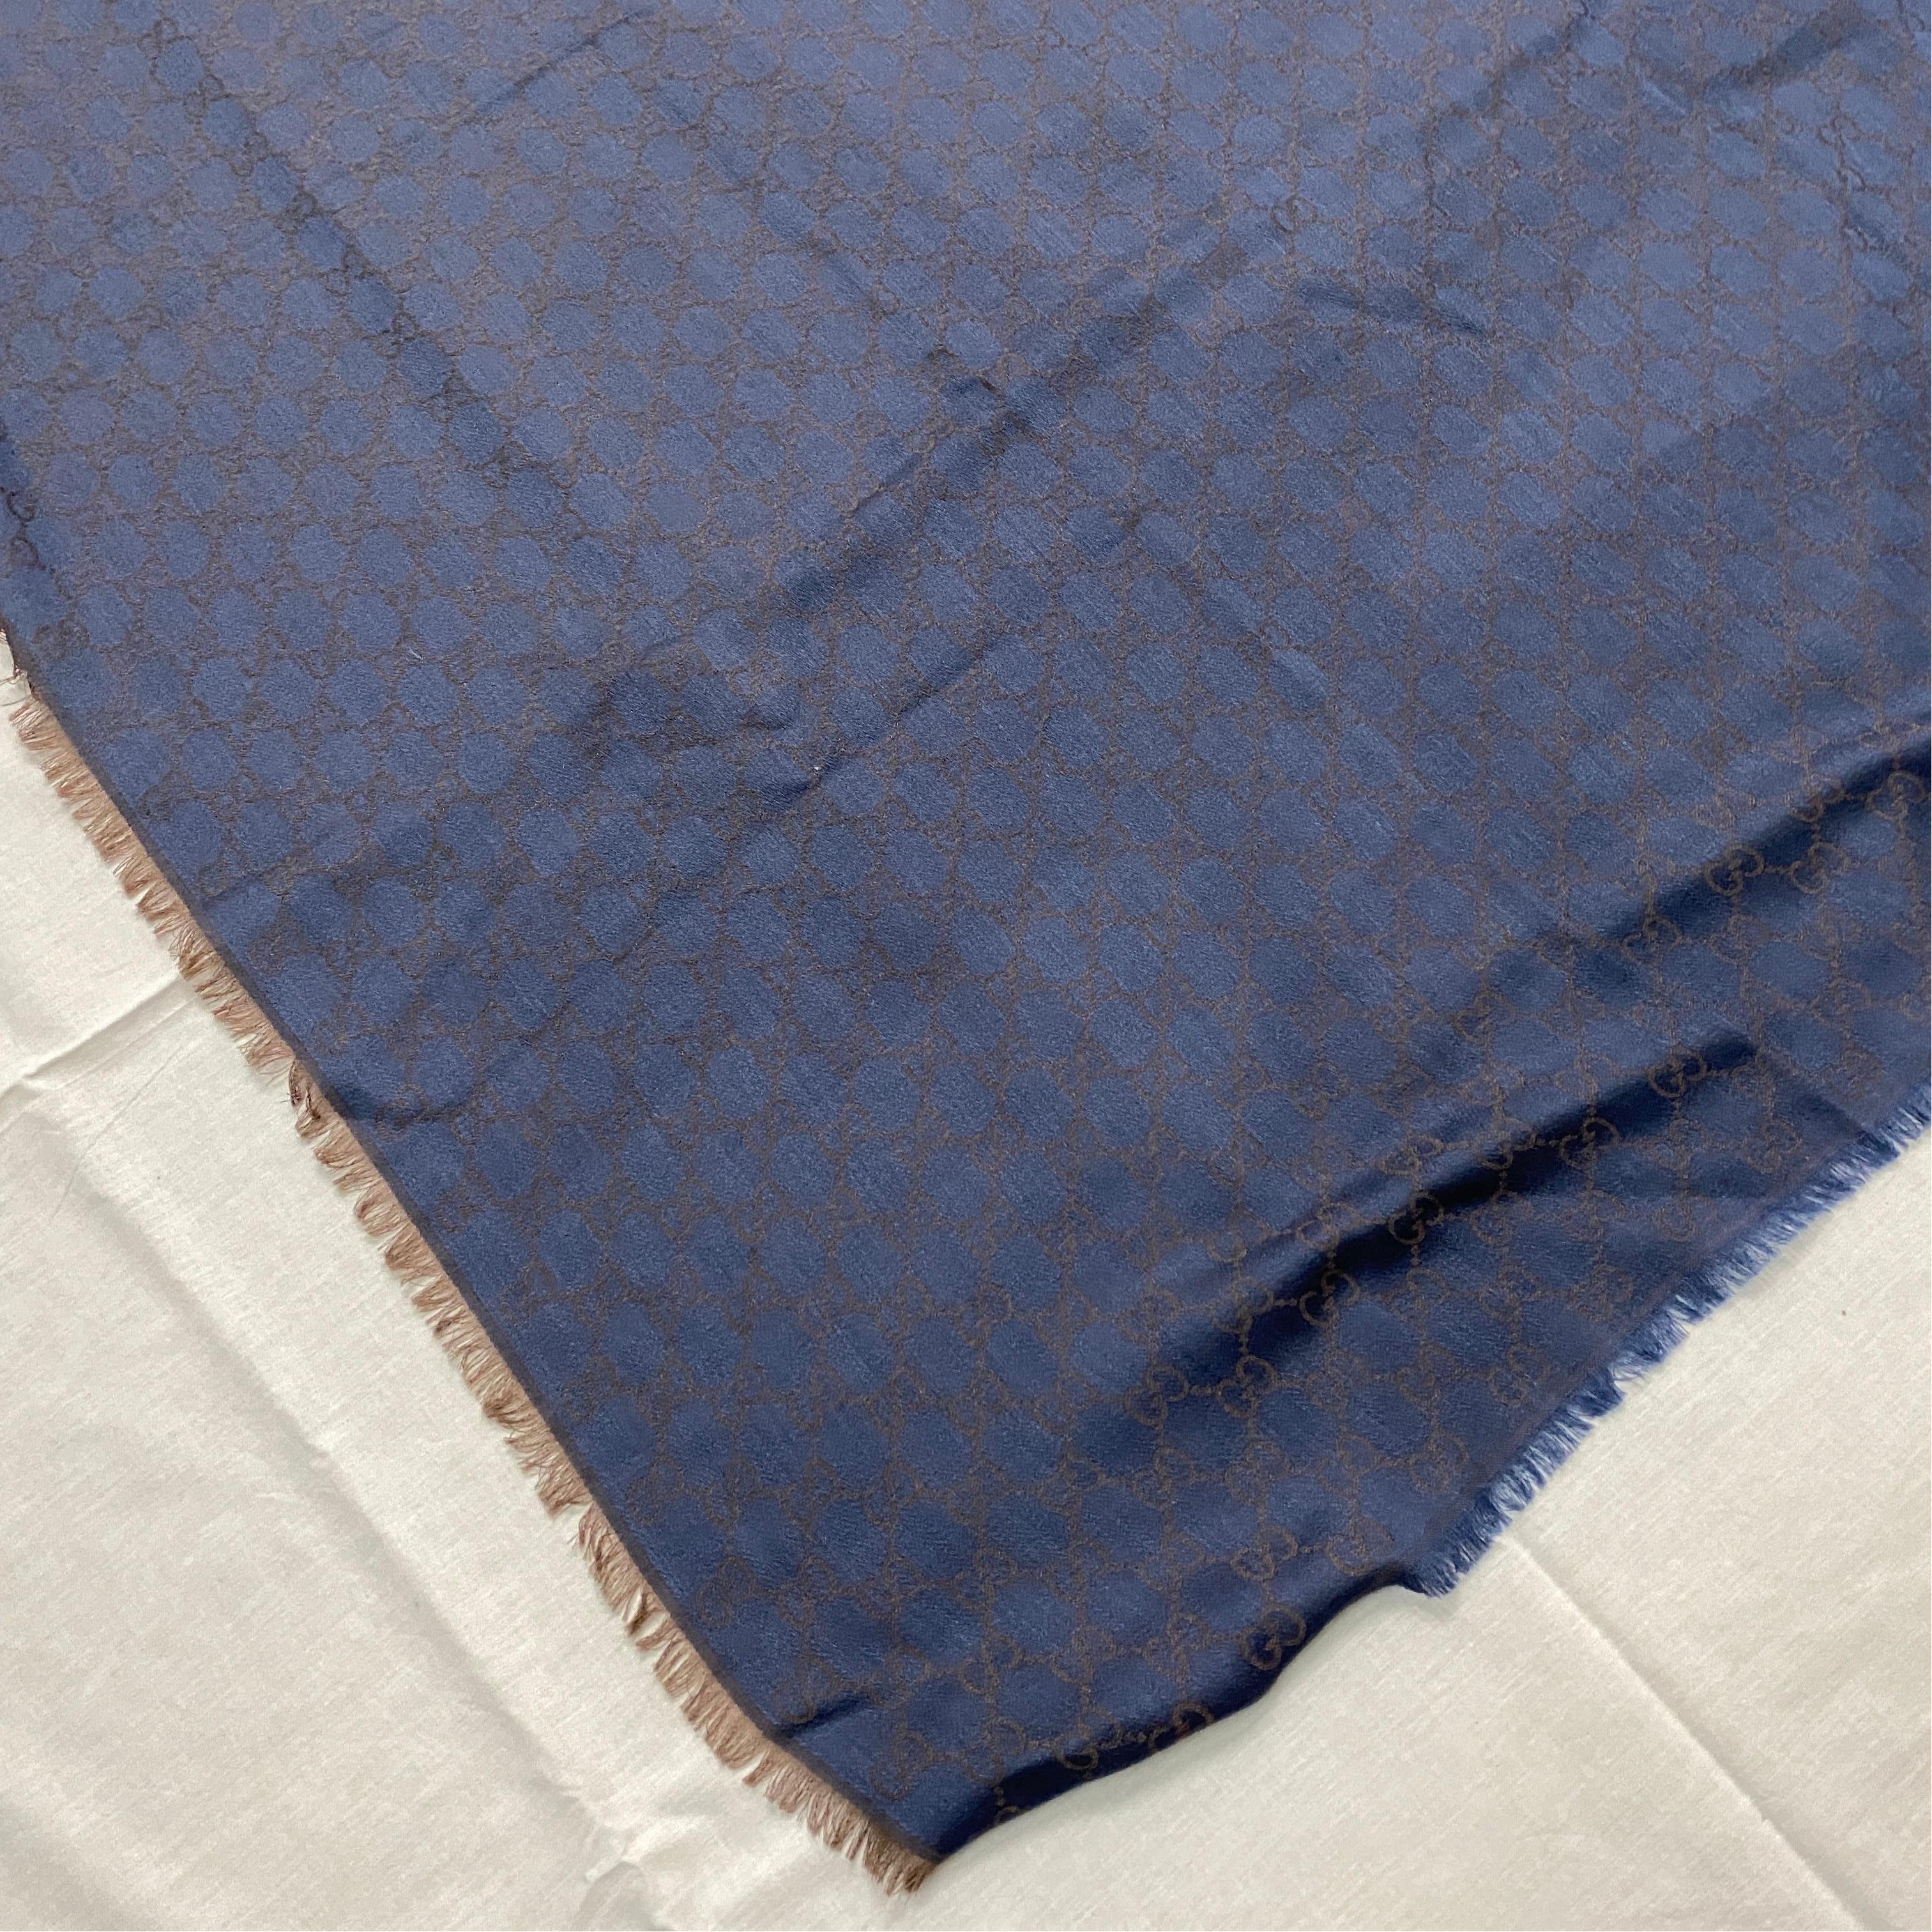 A never worn Blue Scarf in Wool and Silk with GG continuous logo manufactured and designed By Gucci. This scarf is a luxurious and stylish accessory that showcases the iconic Gucci motif. Gucci is a renowned Italian fashion brand known for their